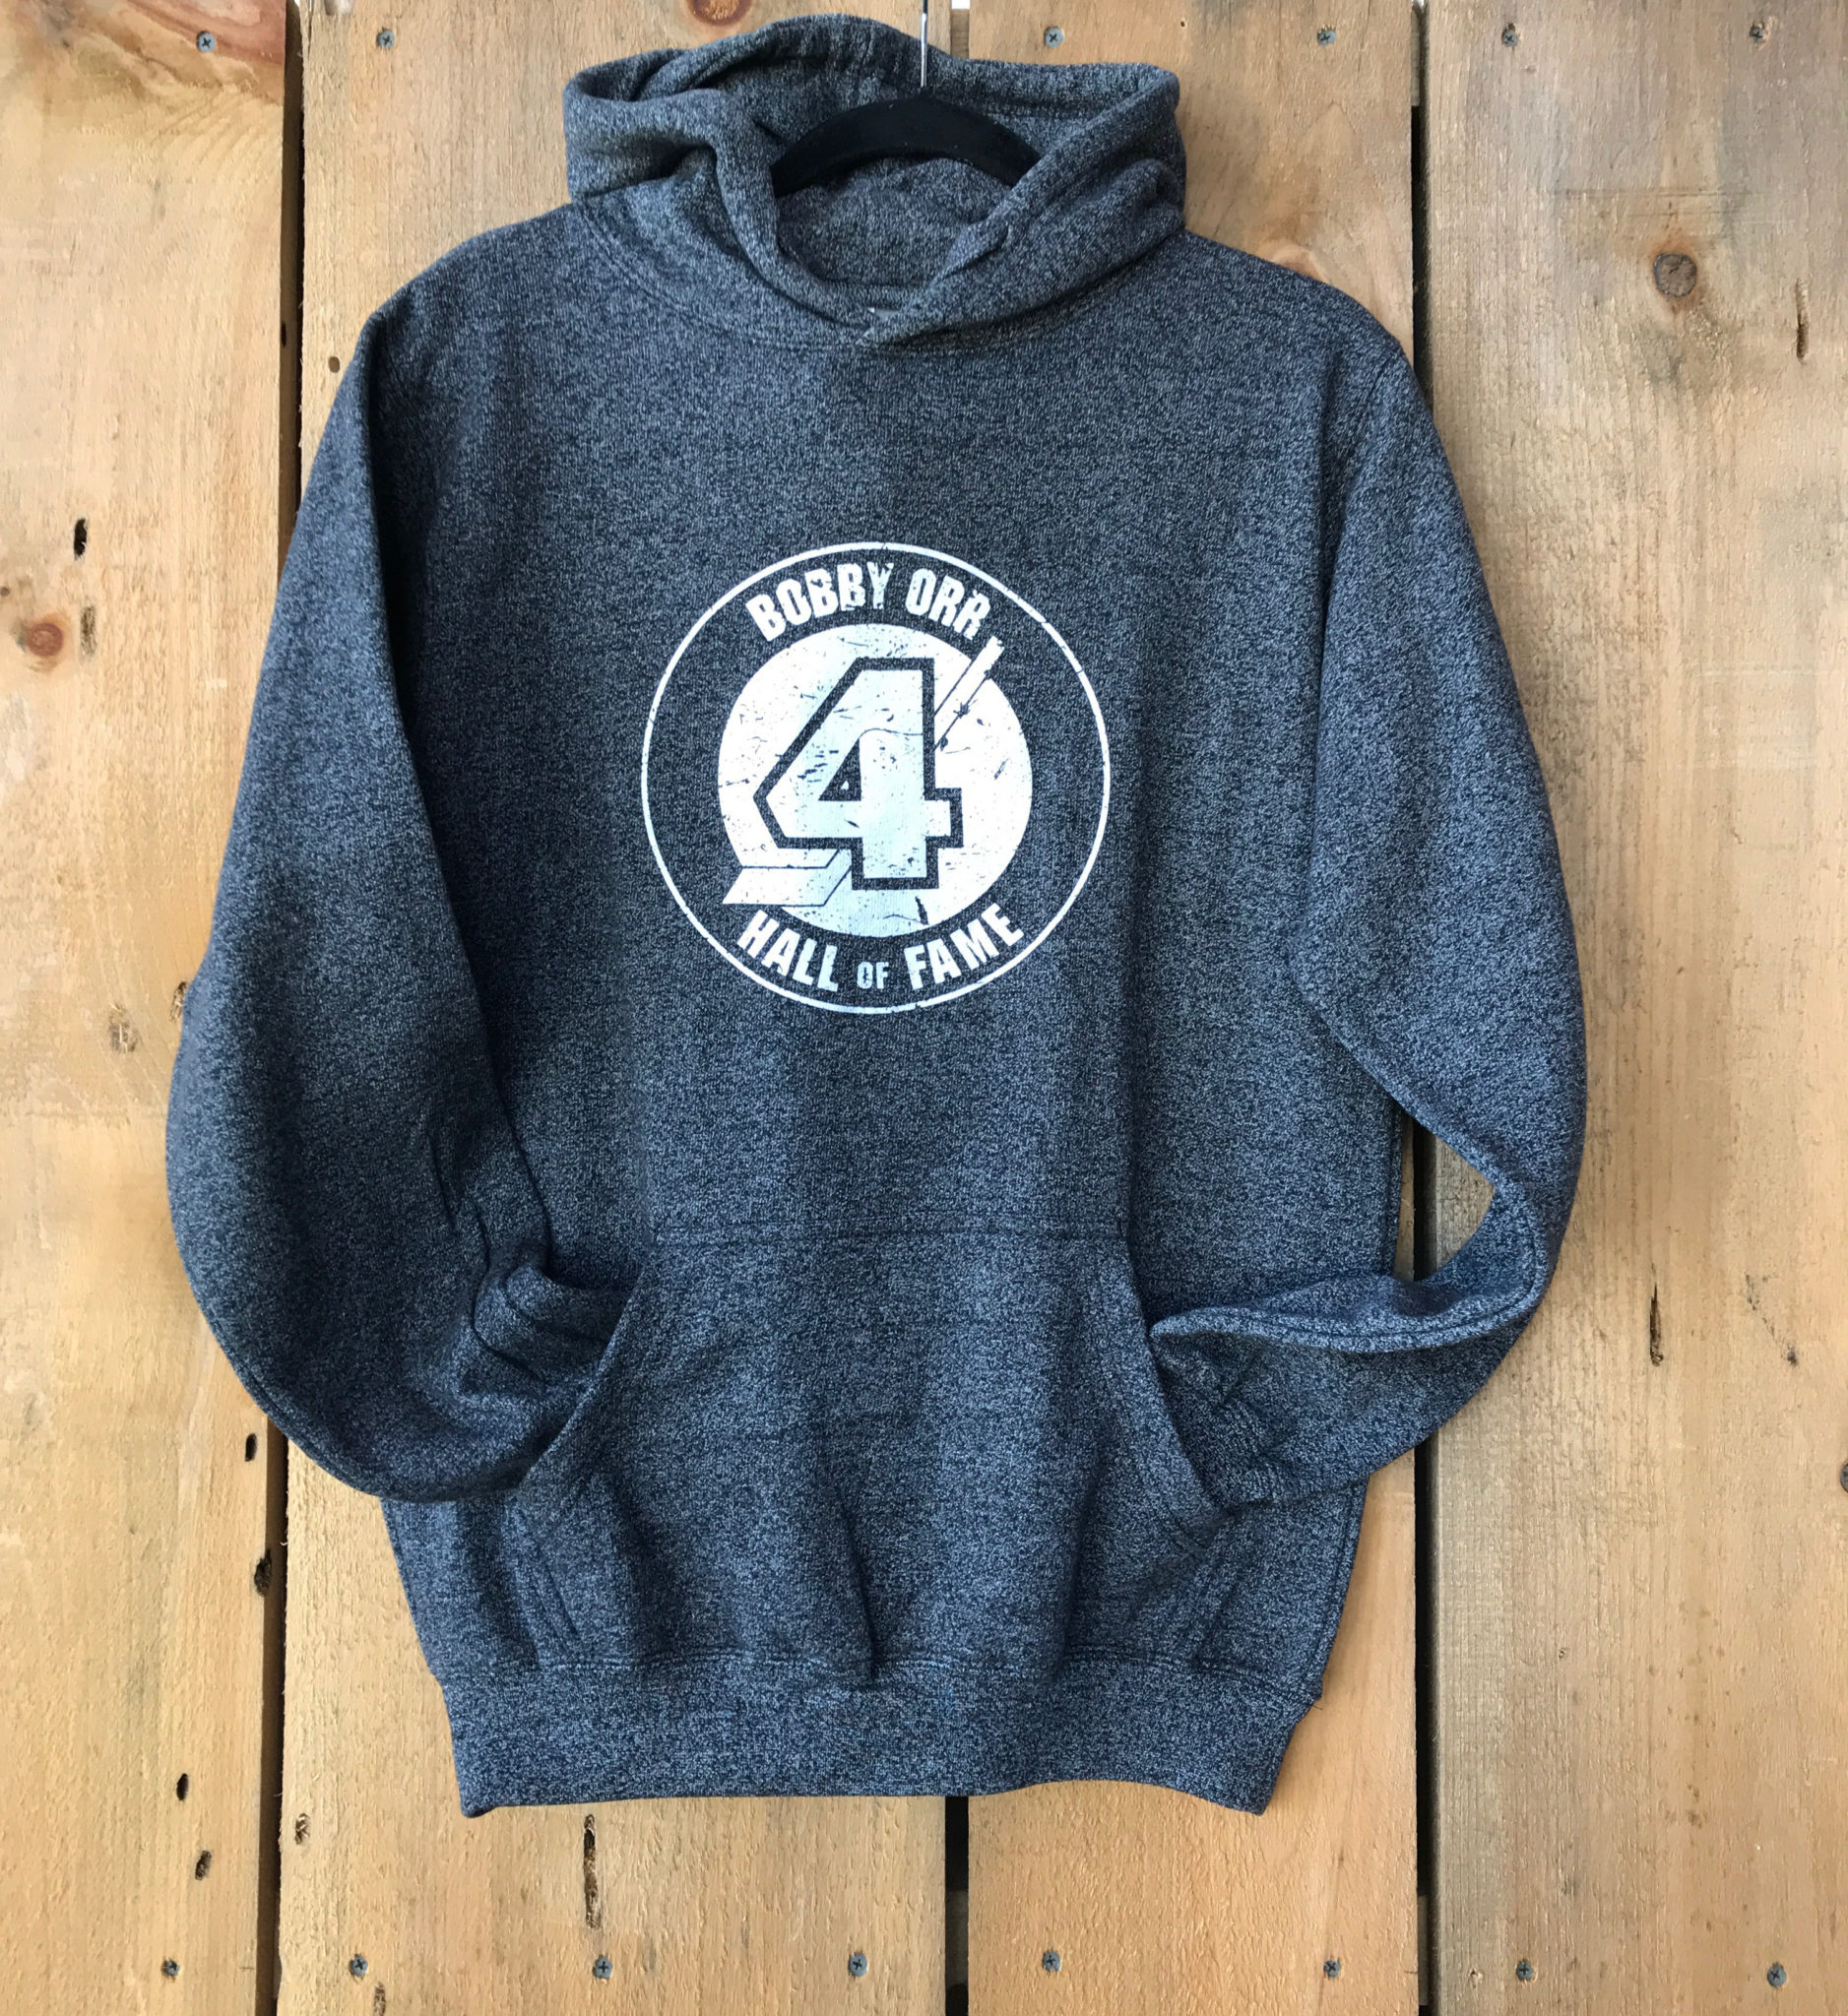 Charcoal Grey Hoodie with Distressed Screen Printed Logo > Bobby Orr ...